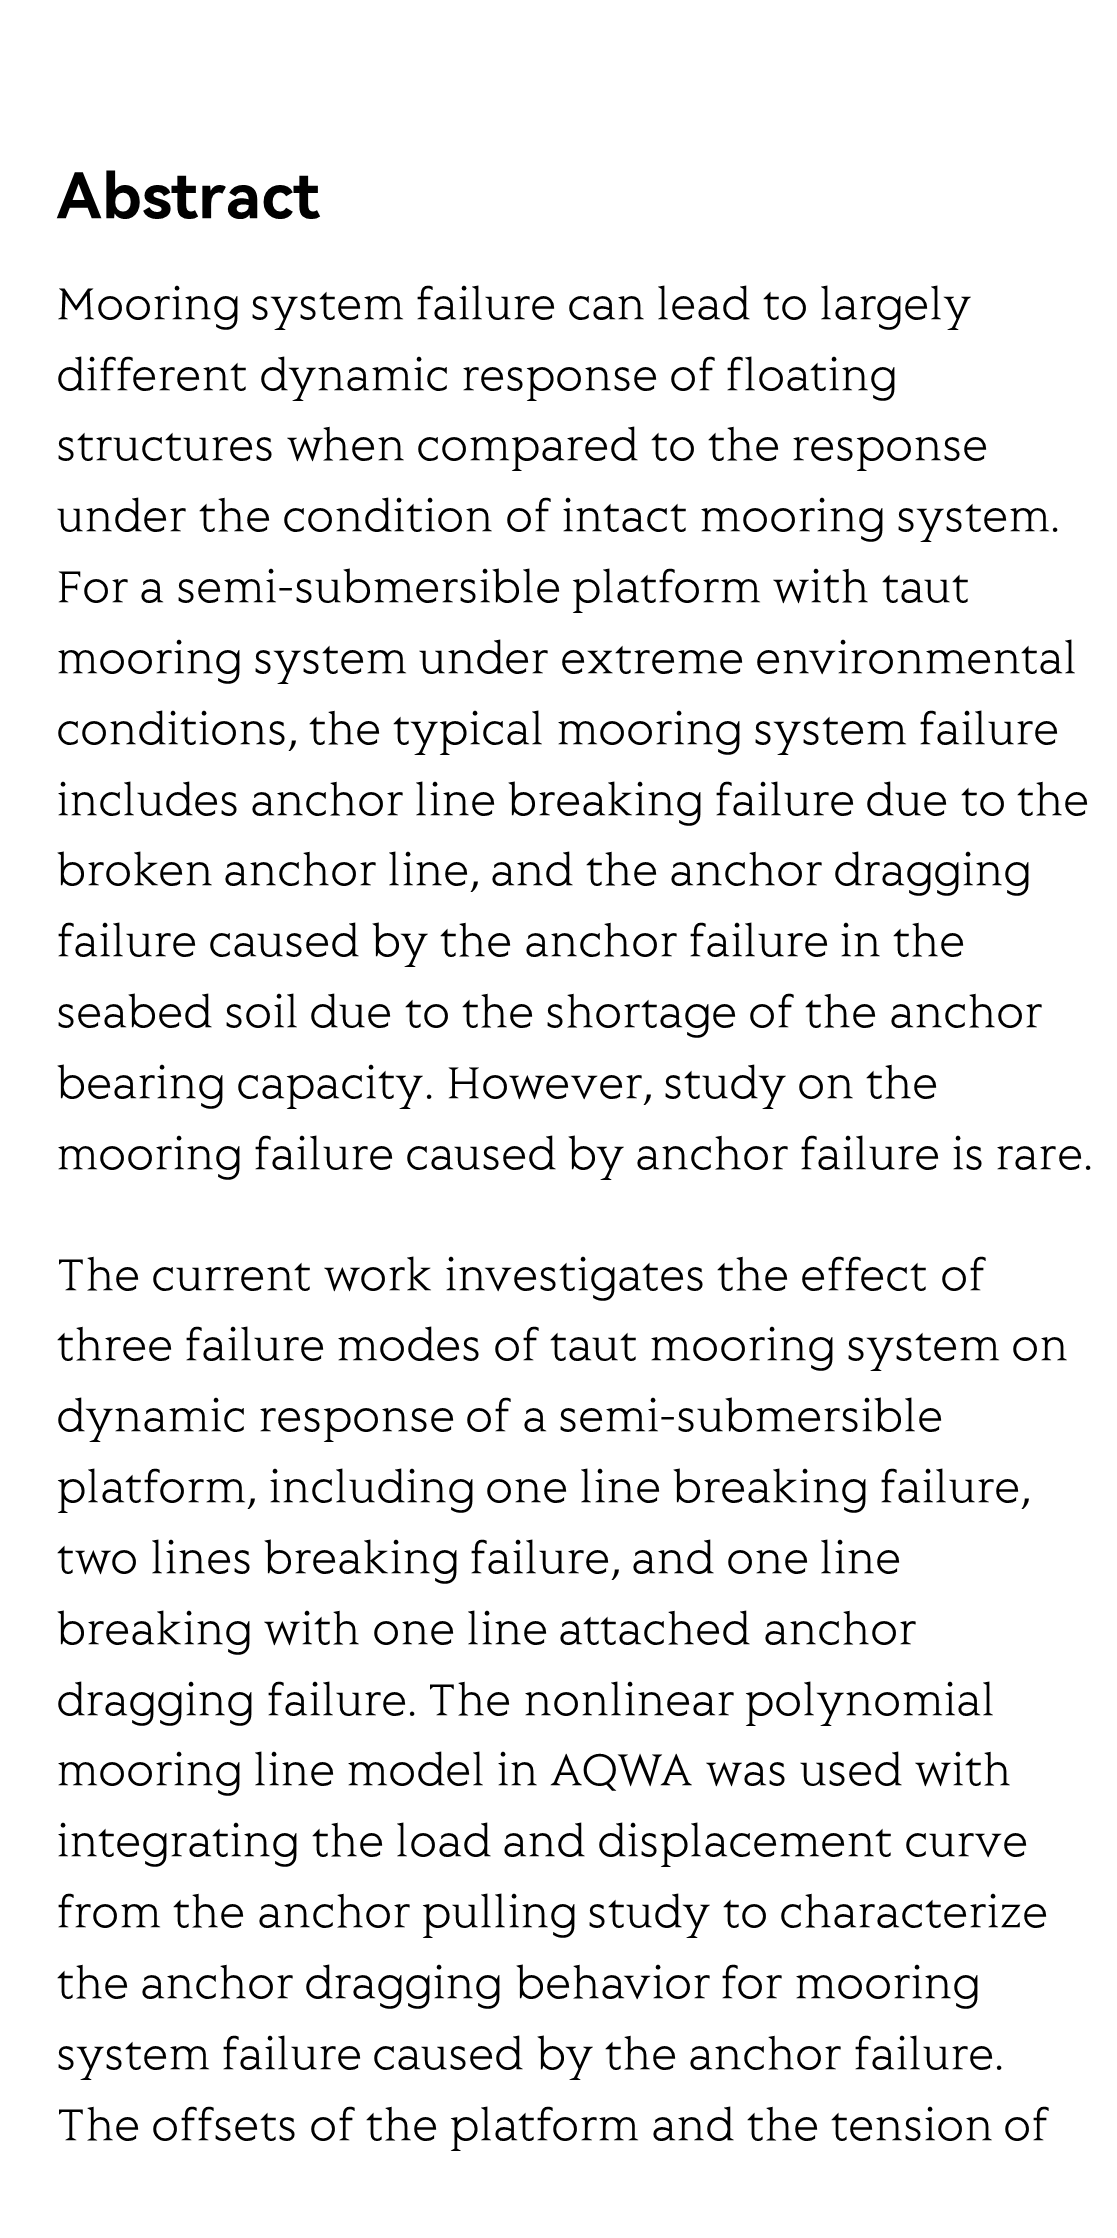 Effect of Failure Mode of Taut Mooring System on the Dynamic Response of A Semi-Submersible Platform_2